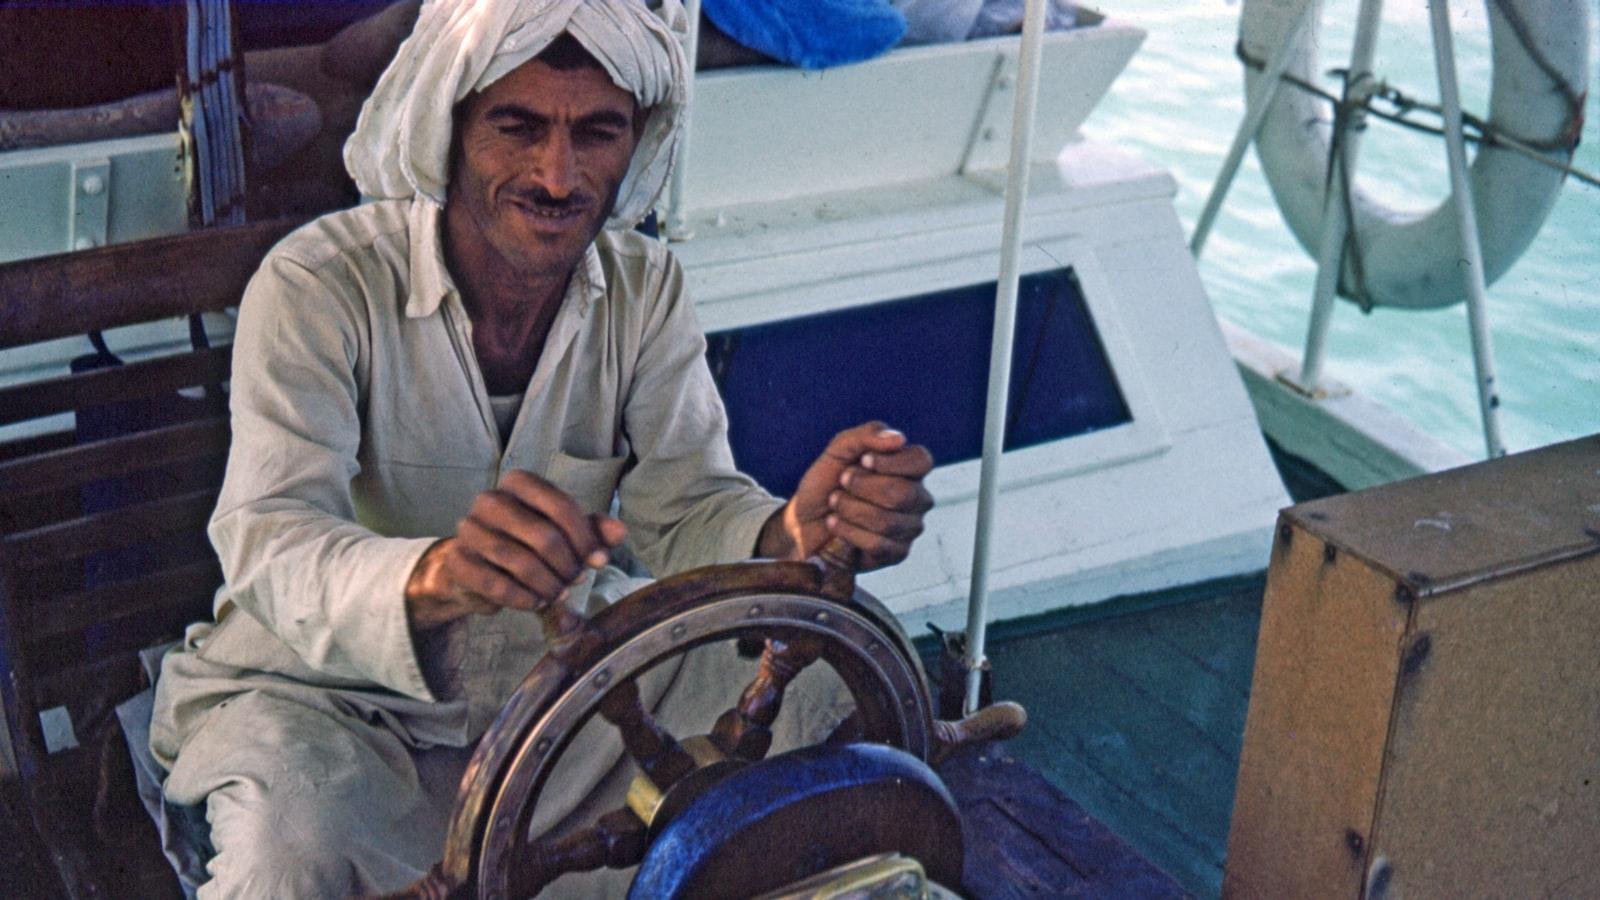 History of Kuwait: From pearl diving to oil riches